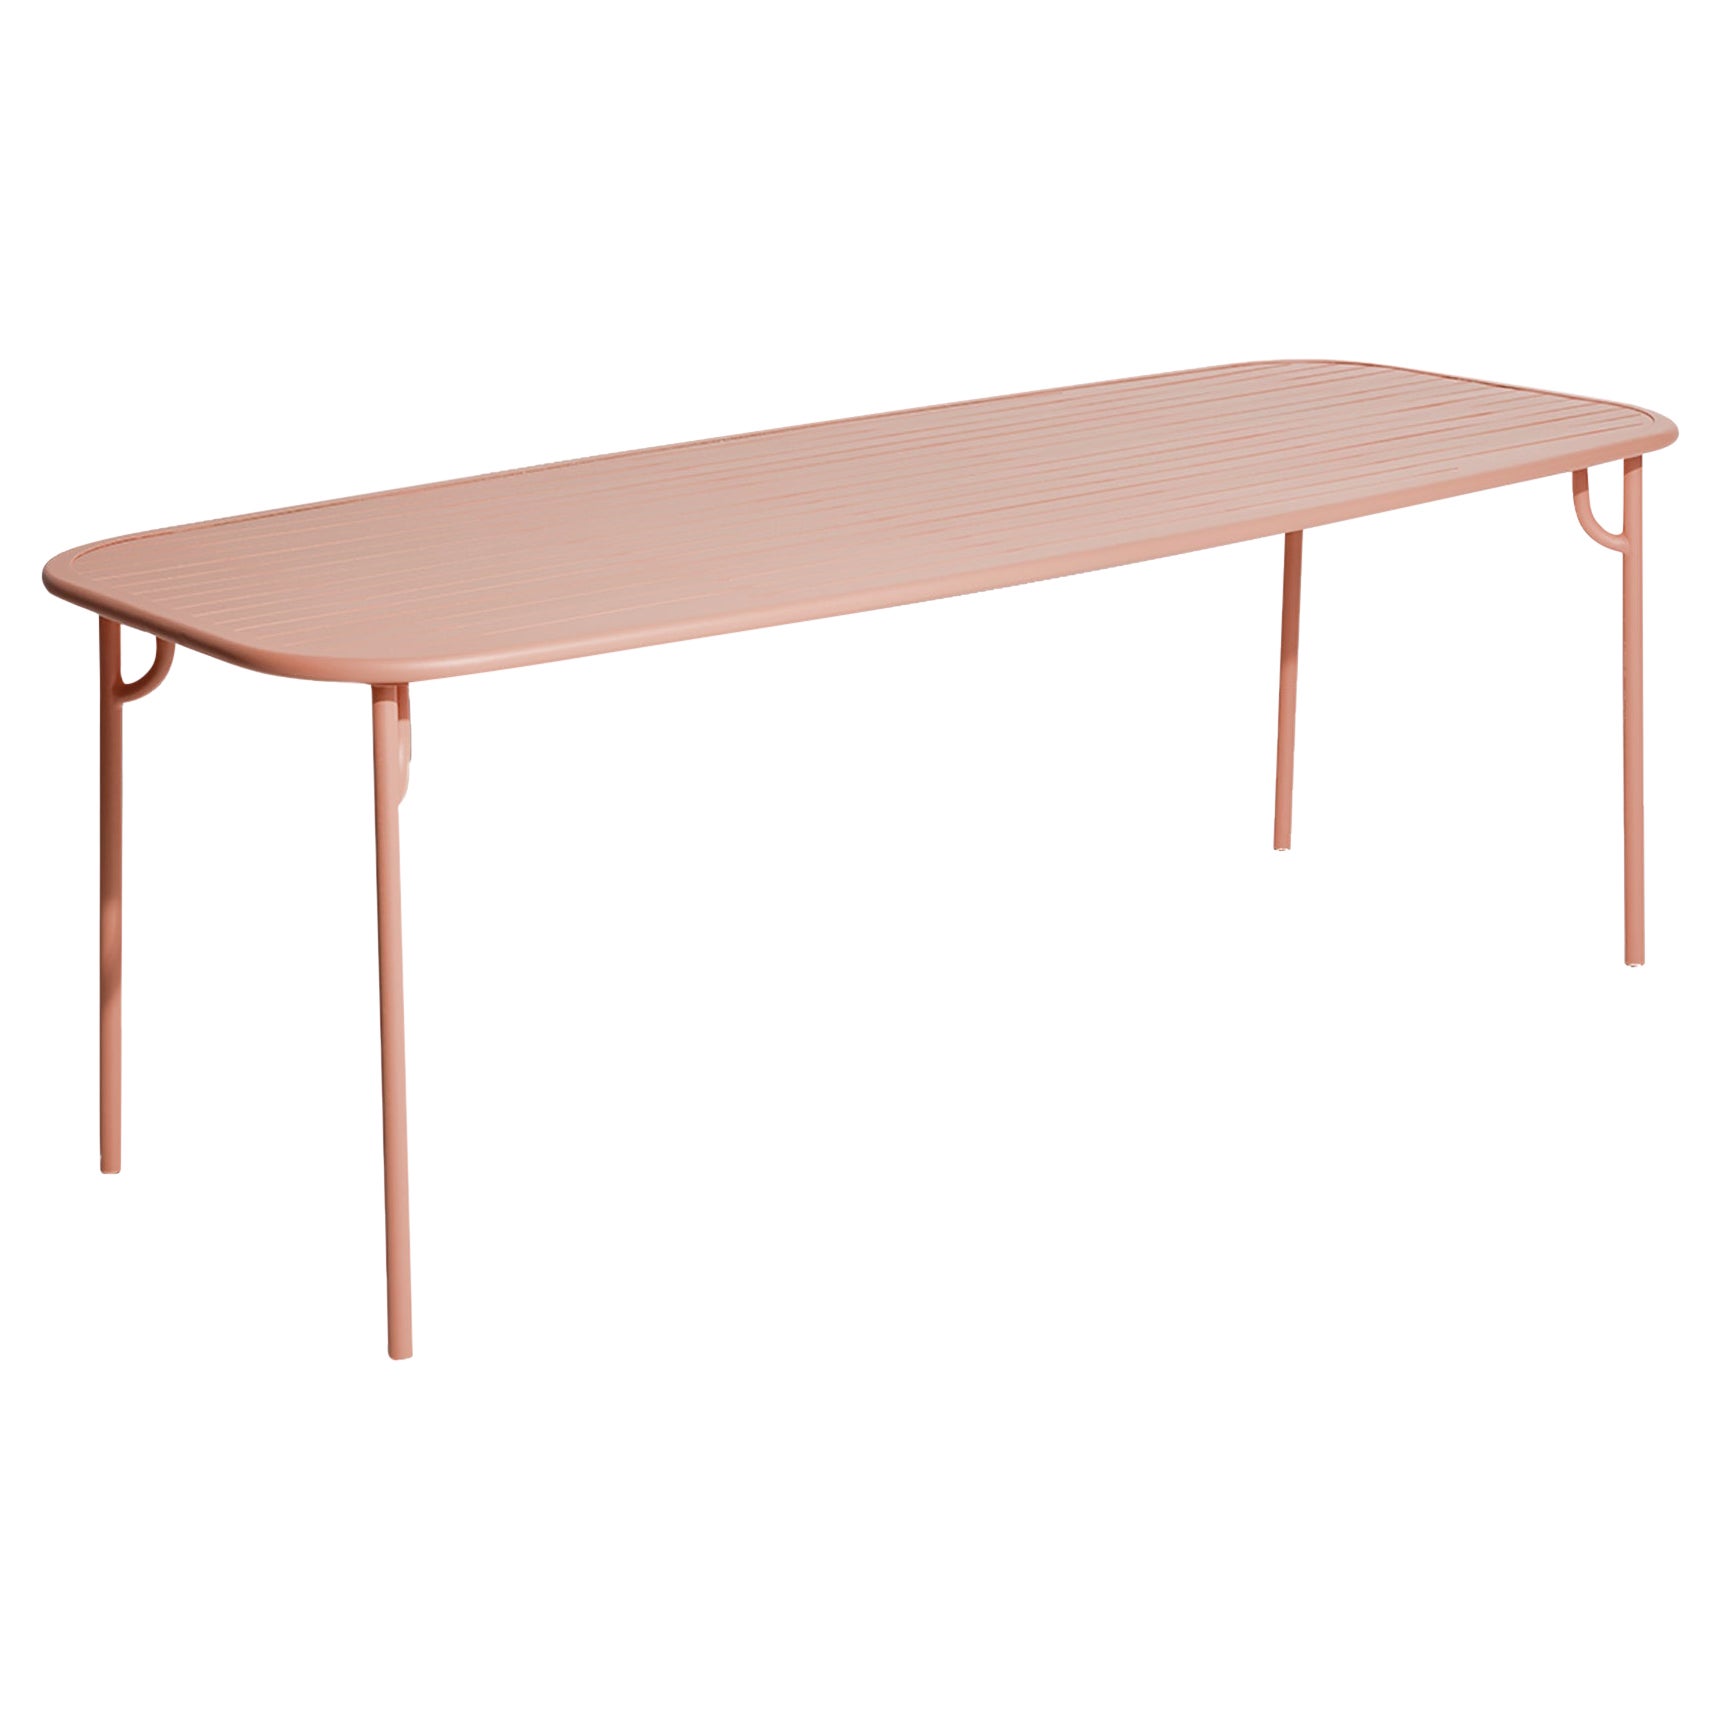 What is the standard size of a rectangular dining table?